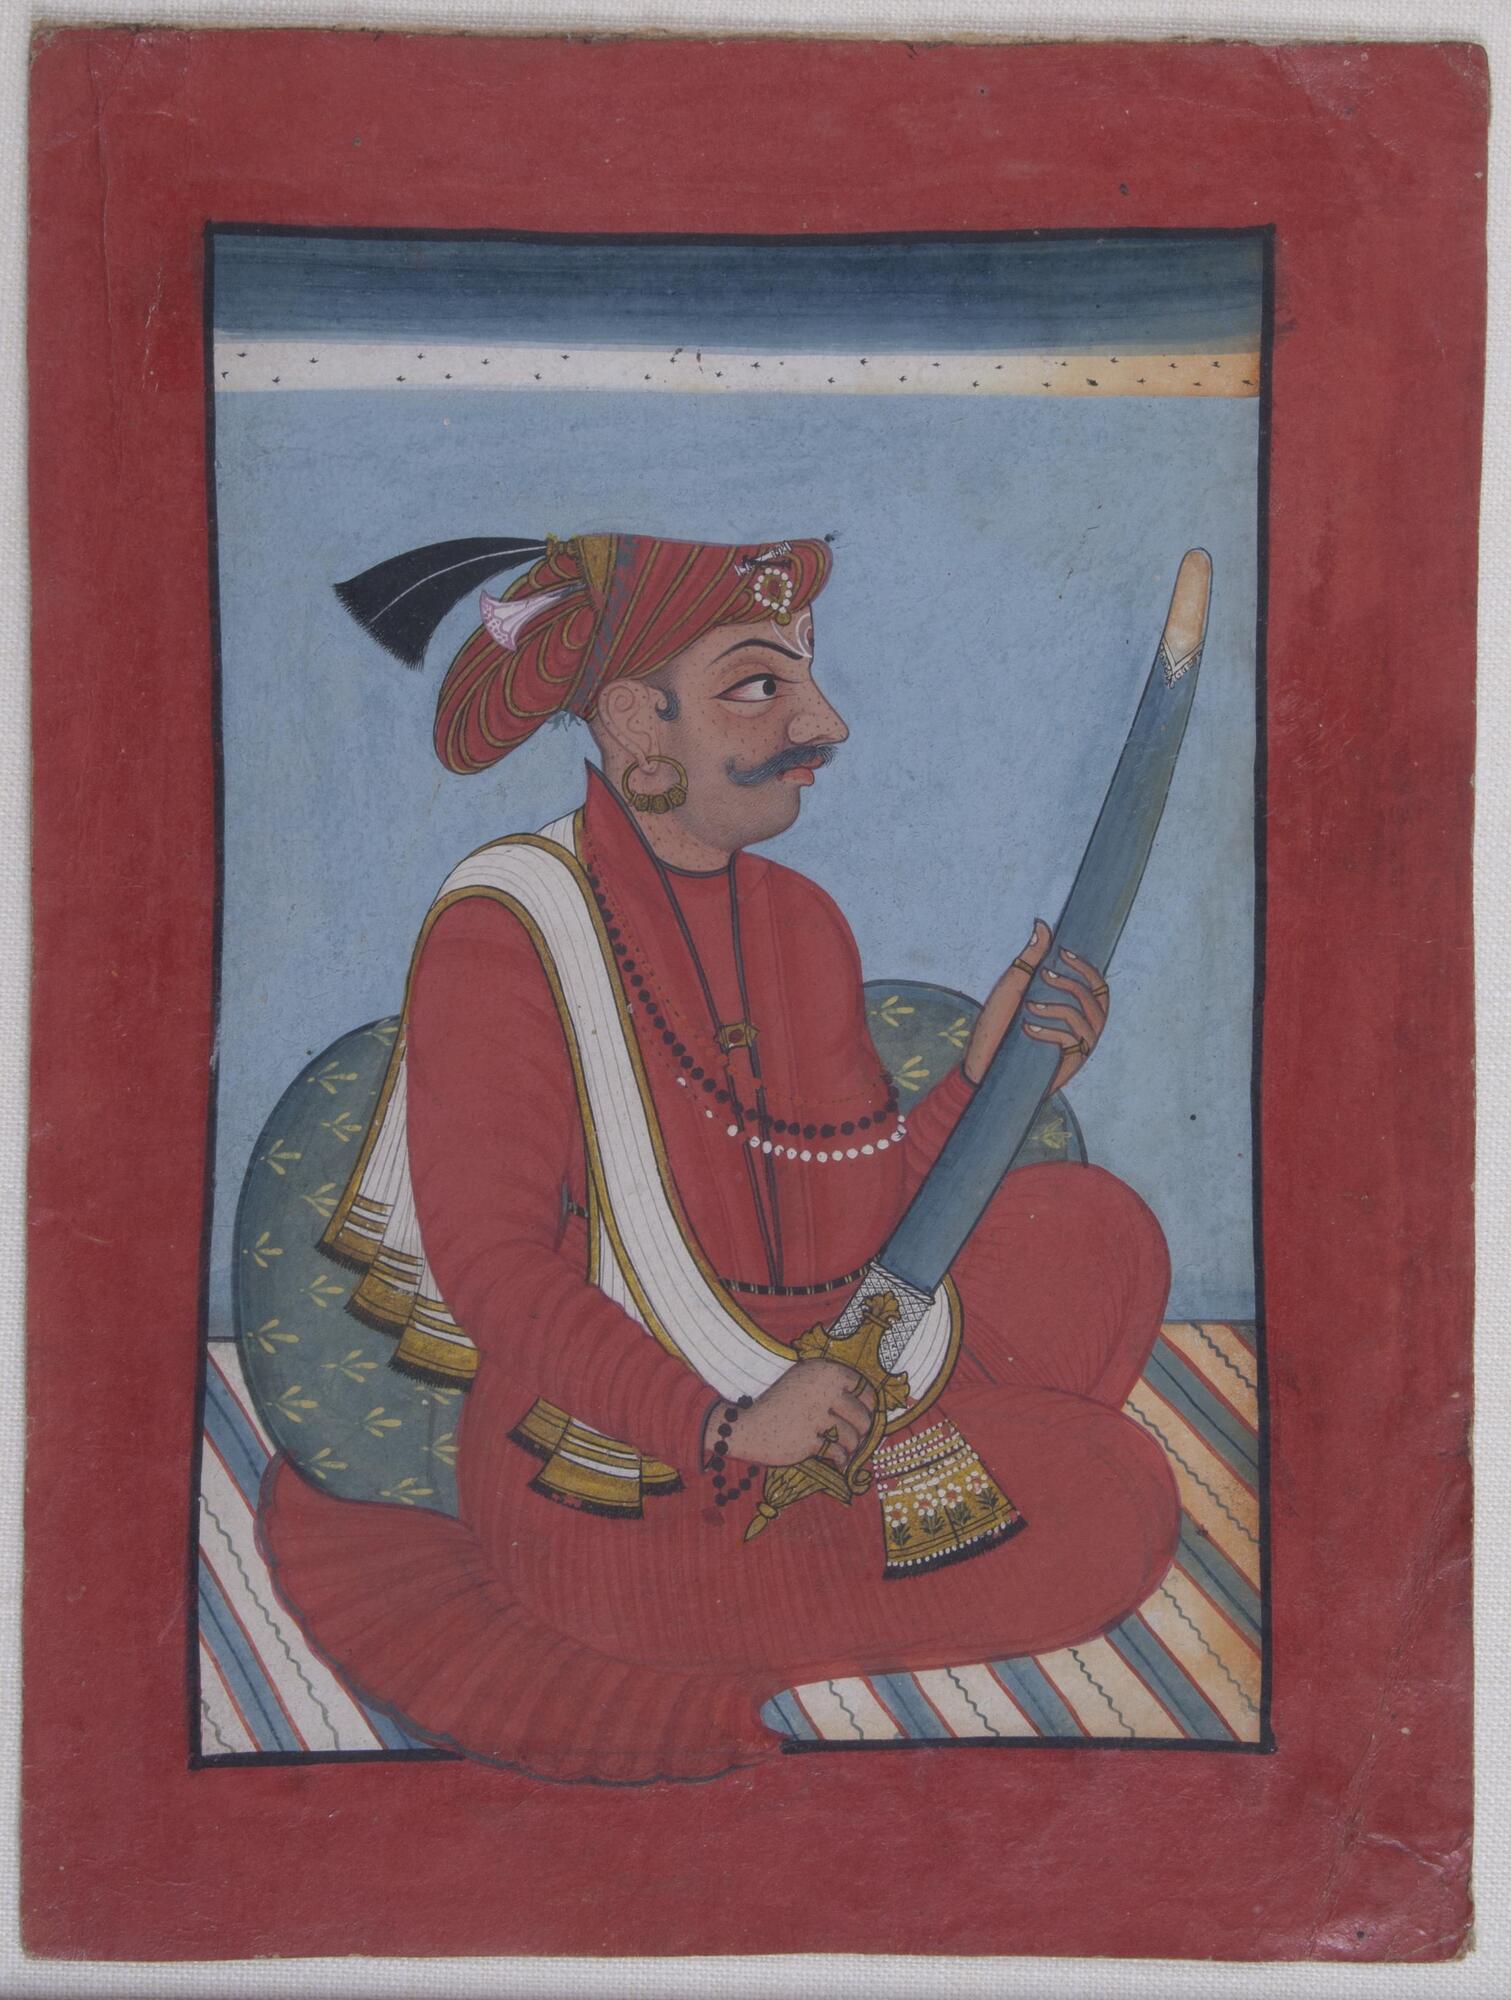 A man sits on a striped surface with his legs crossed under his red clothing. He wears a white sash across his right shoulder and a red hat. In his hands he holds a sheathed sword.